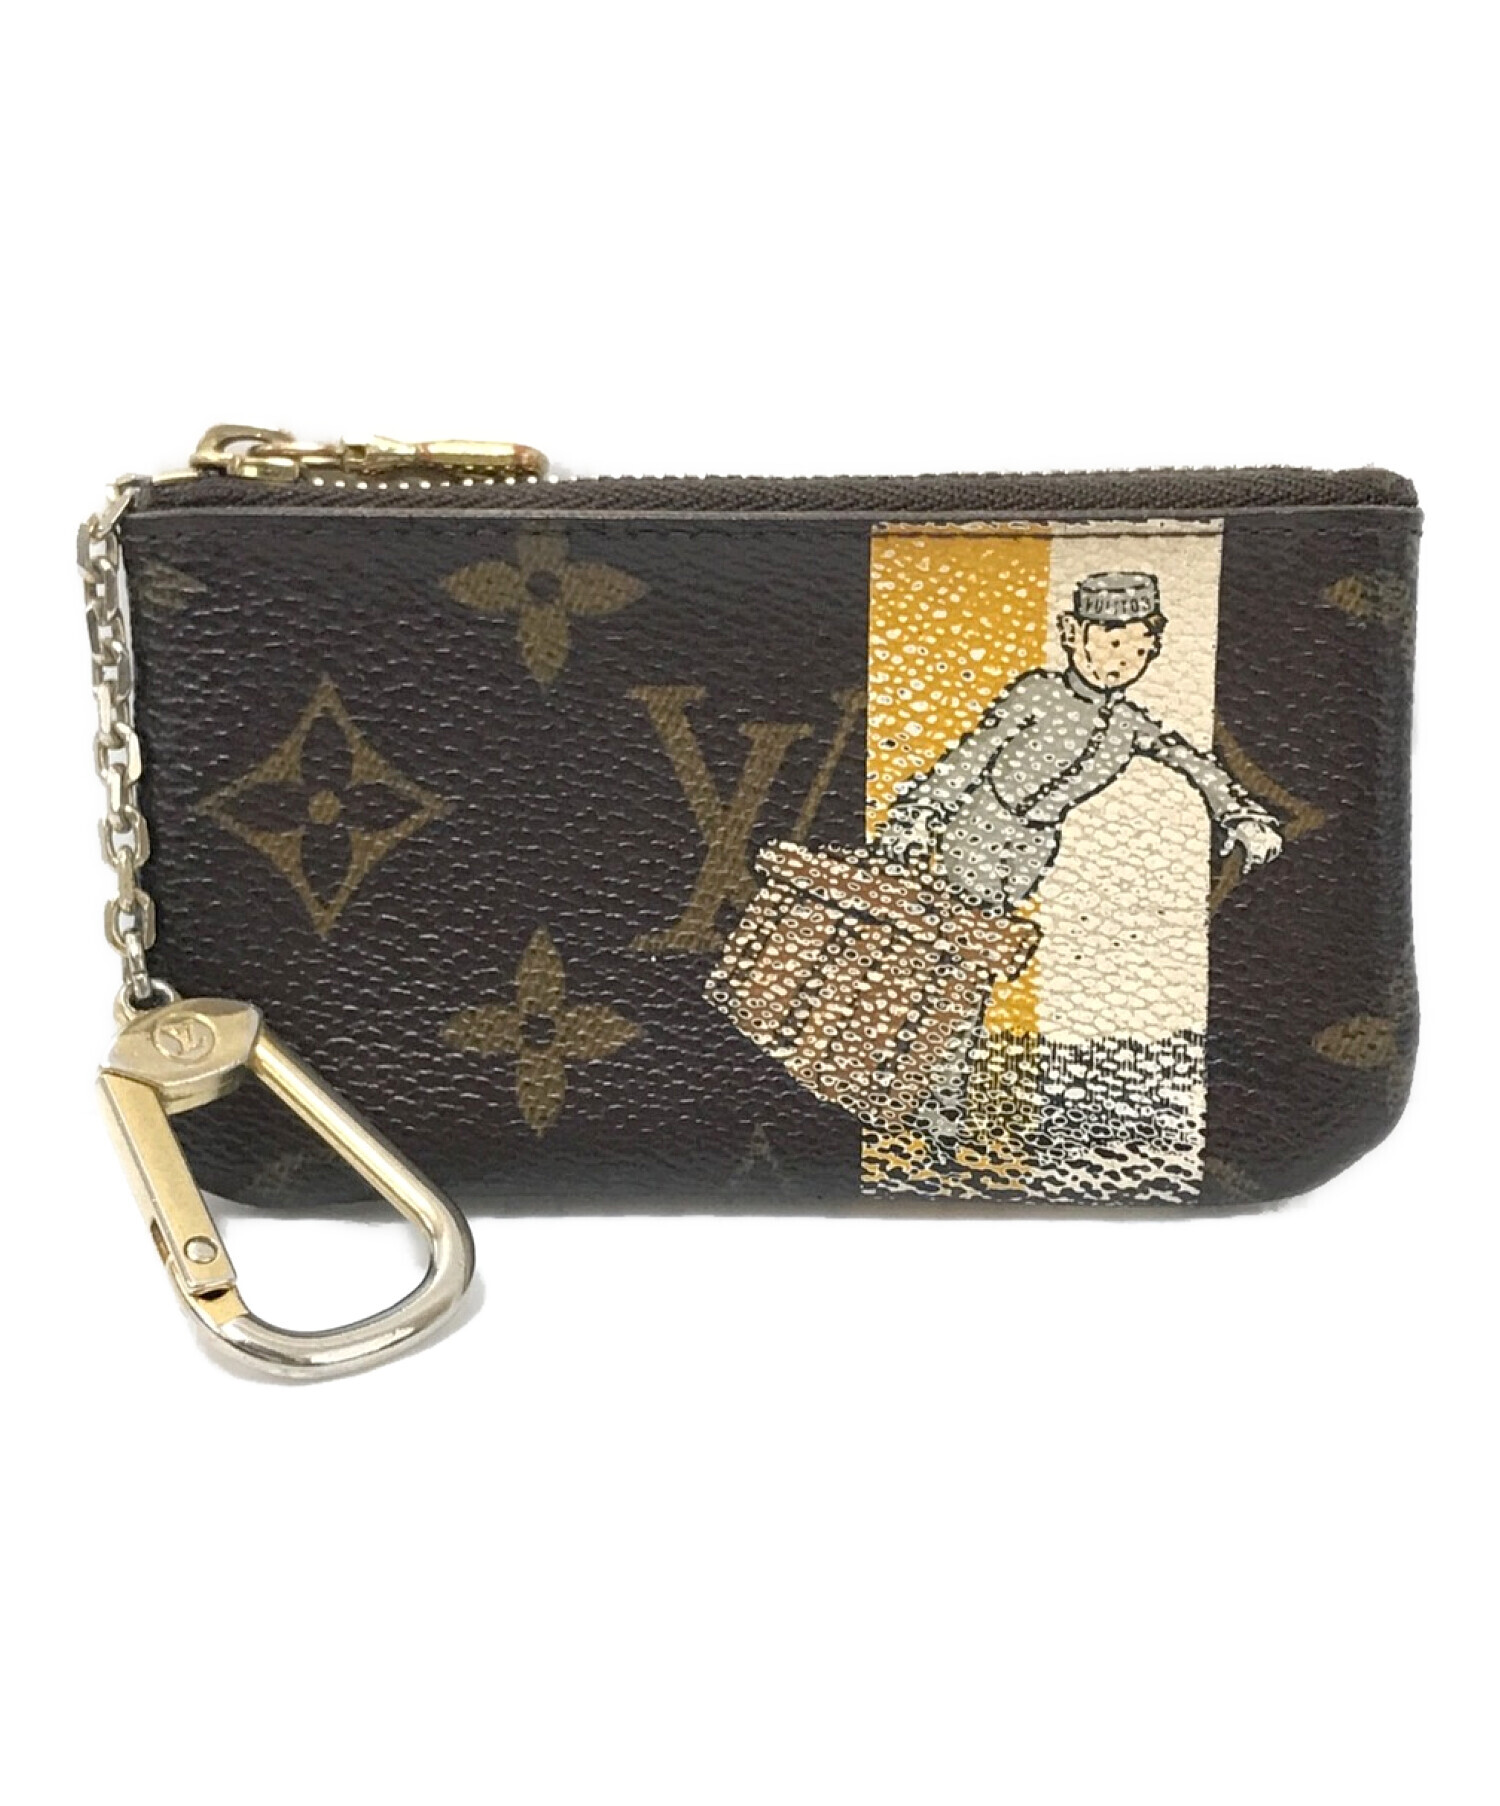 LOUIS VUITTON/ルイヴィトン　ポシェット　クレ